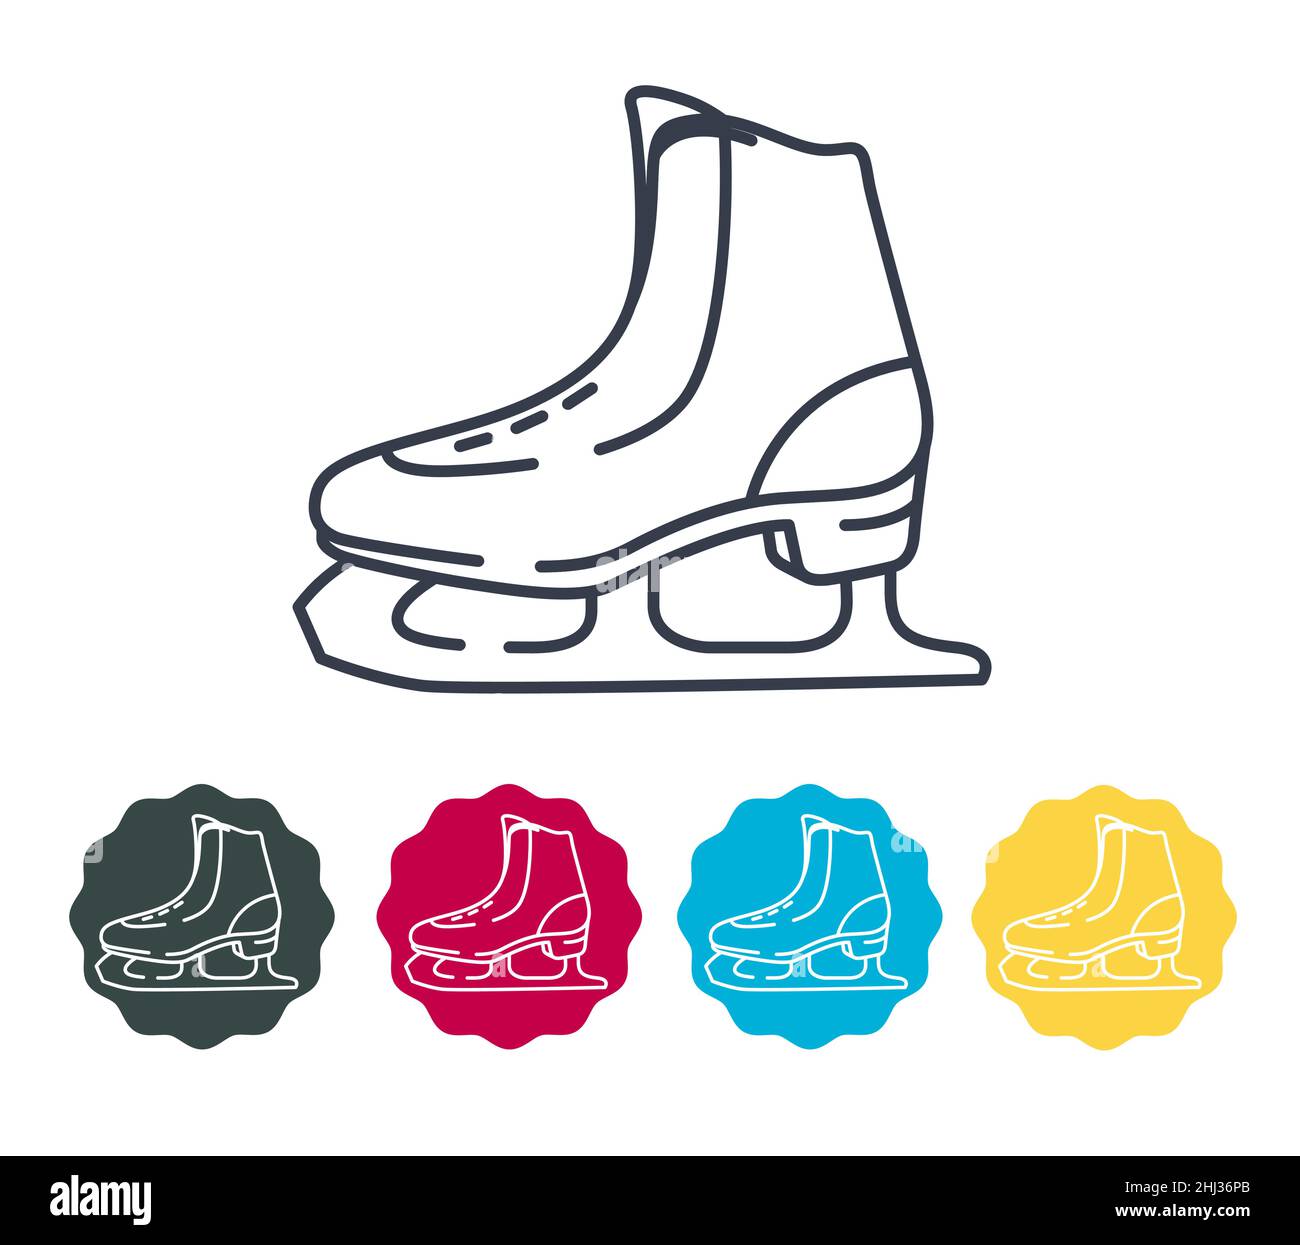 Ice skating Shoes - Stock Icon as EPS 10 File Stock Vector